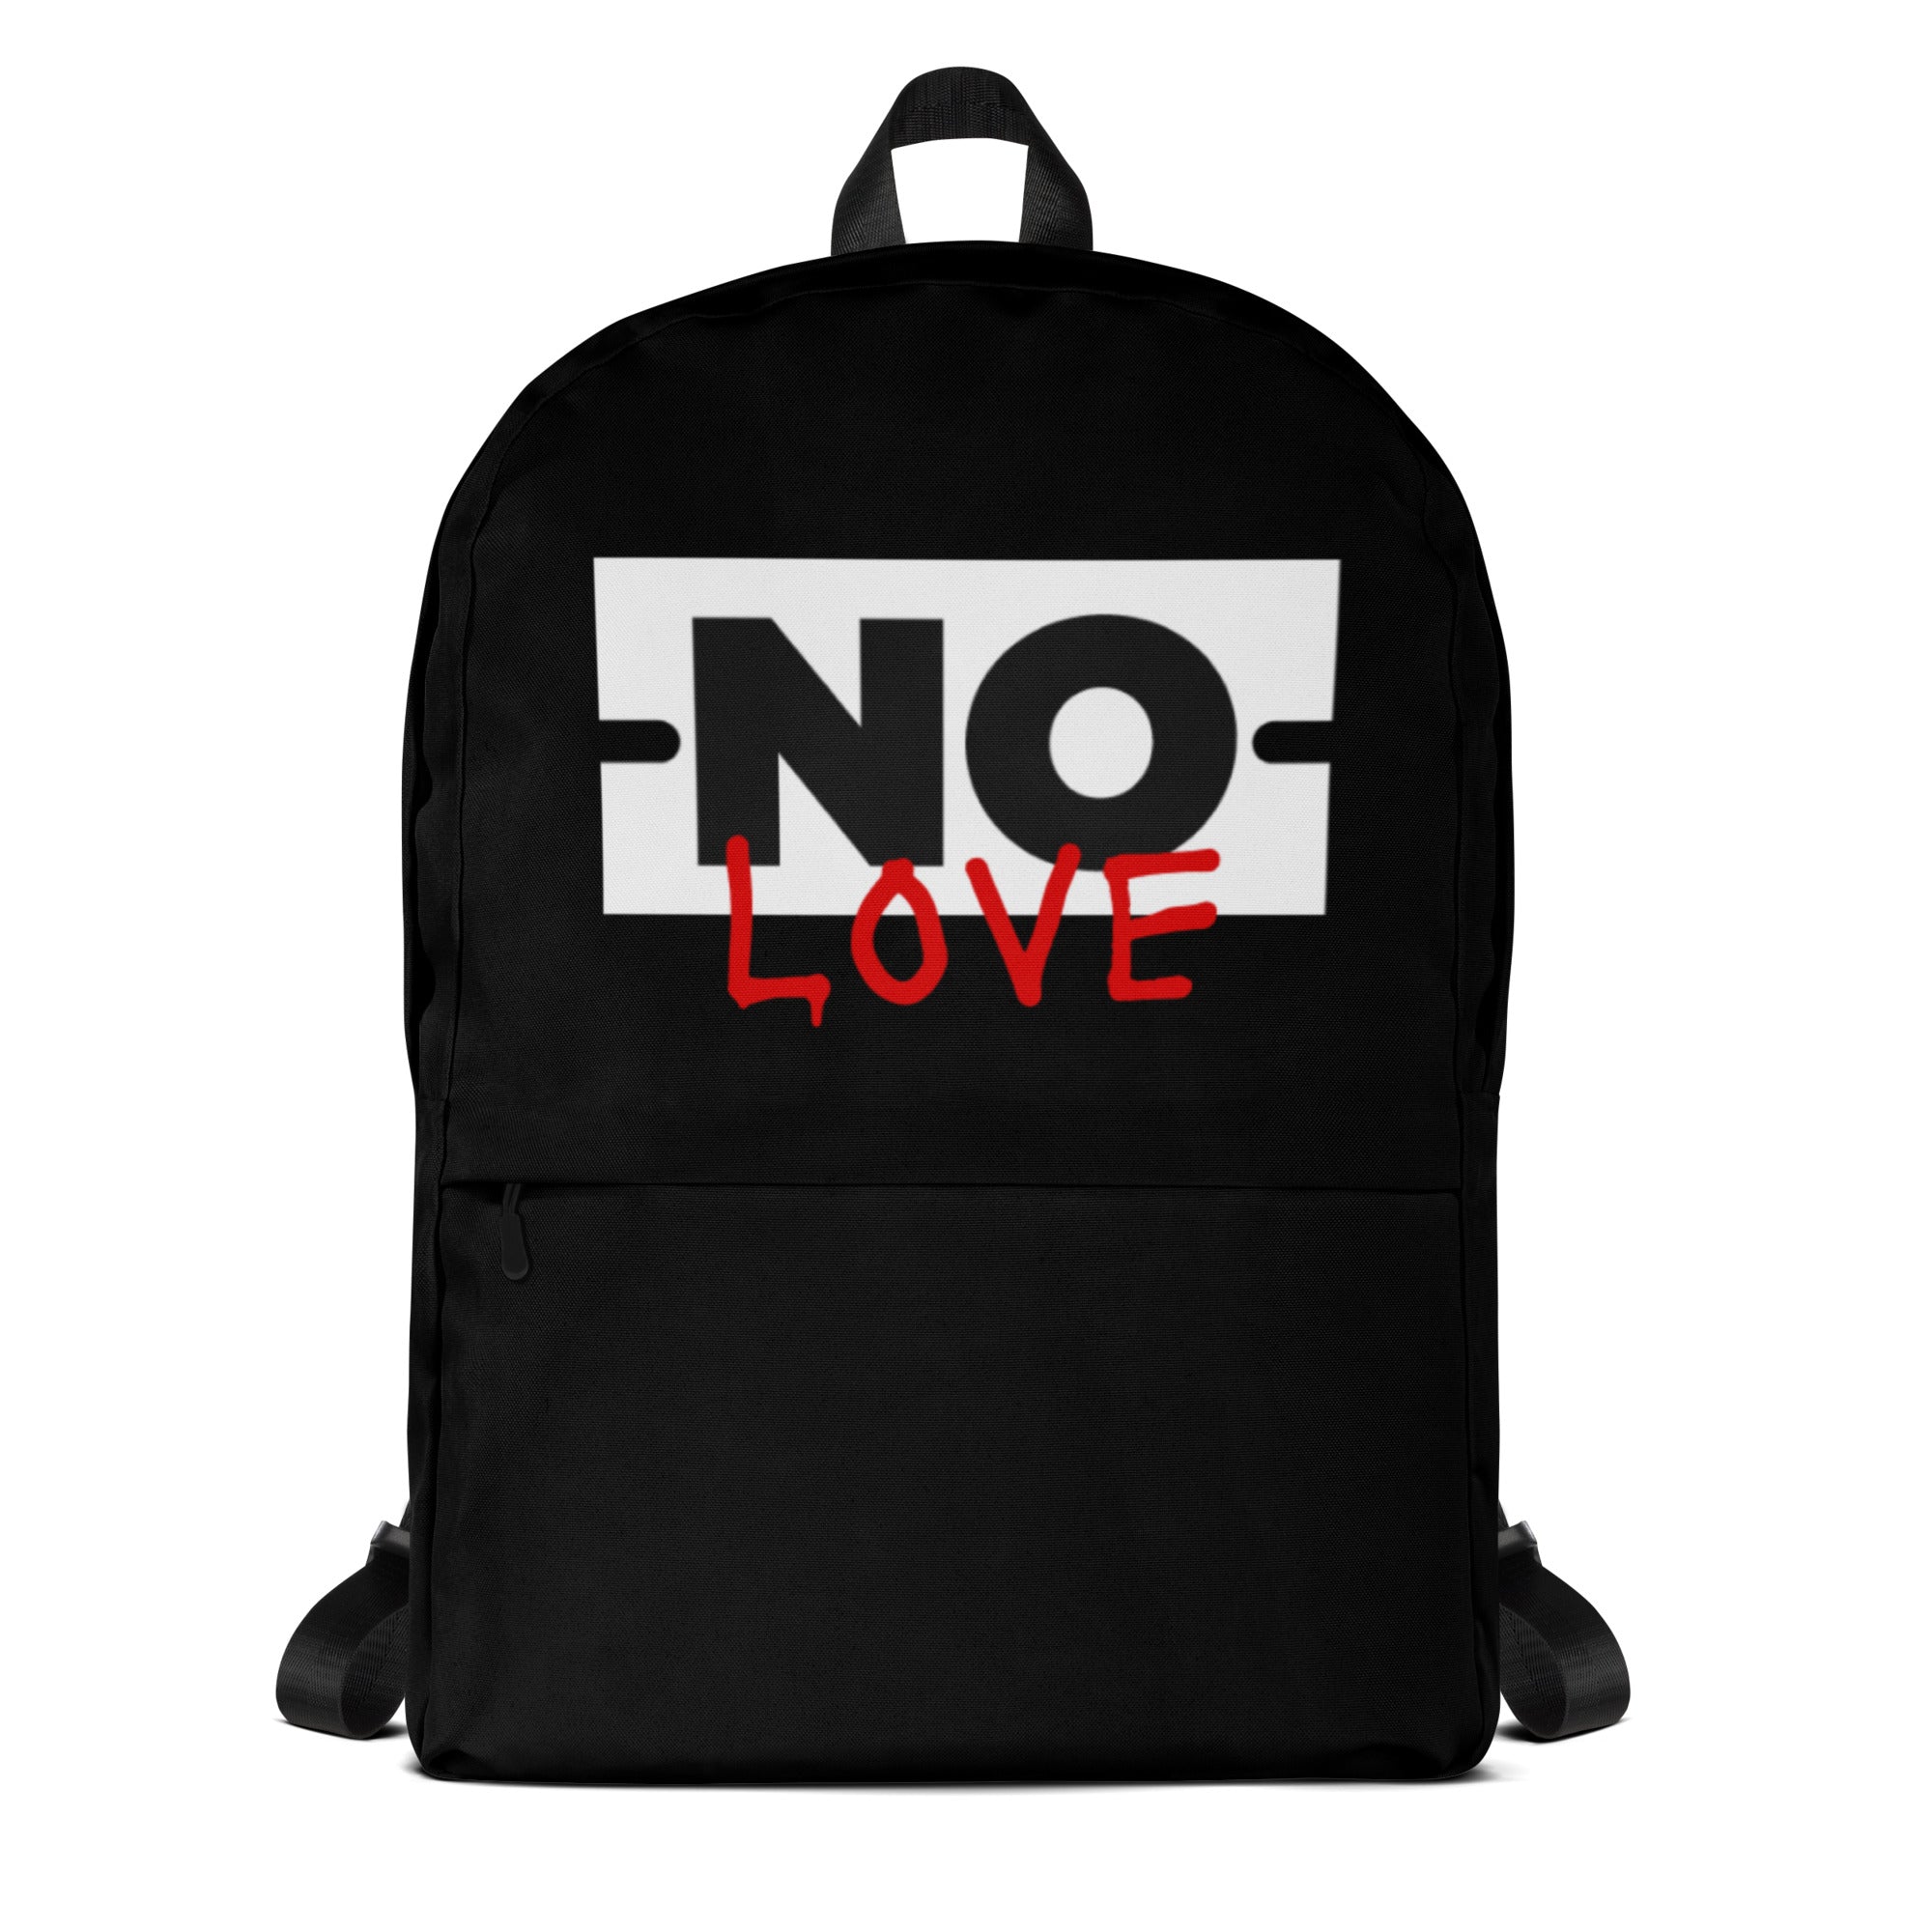 NO LOVE Backpack